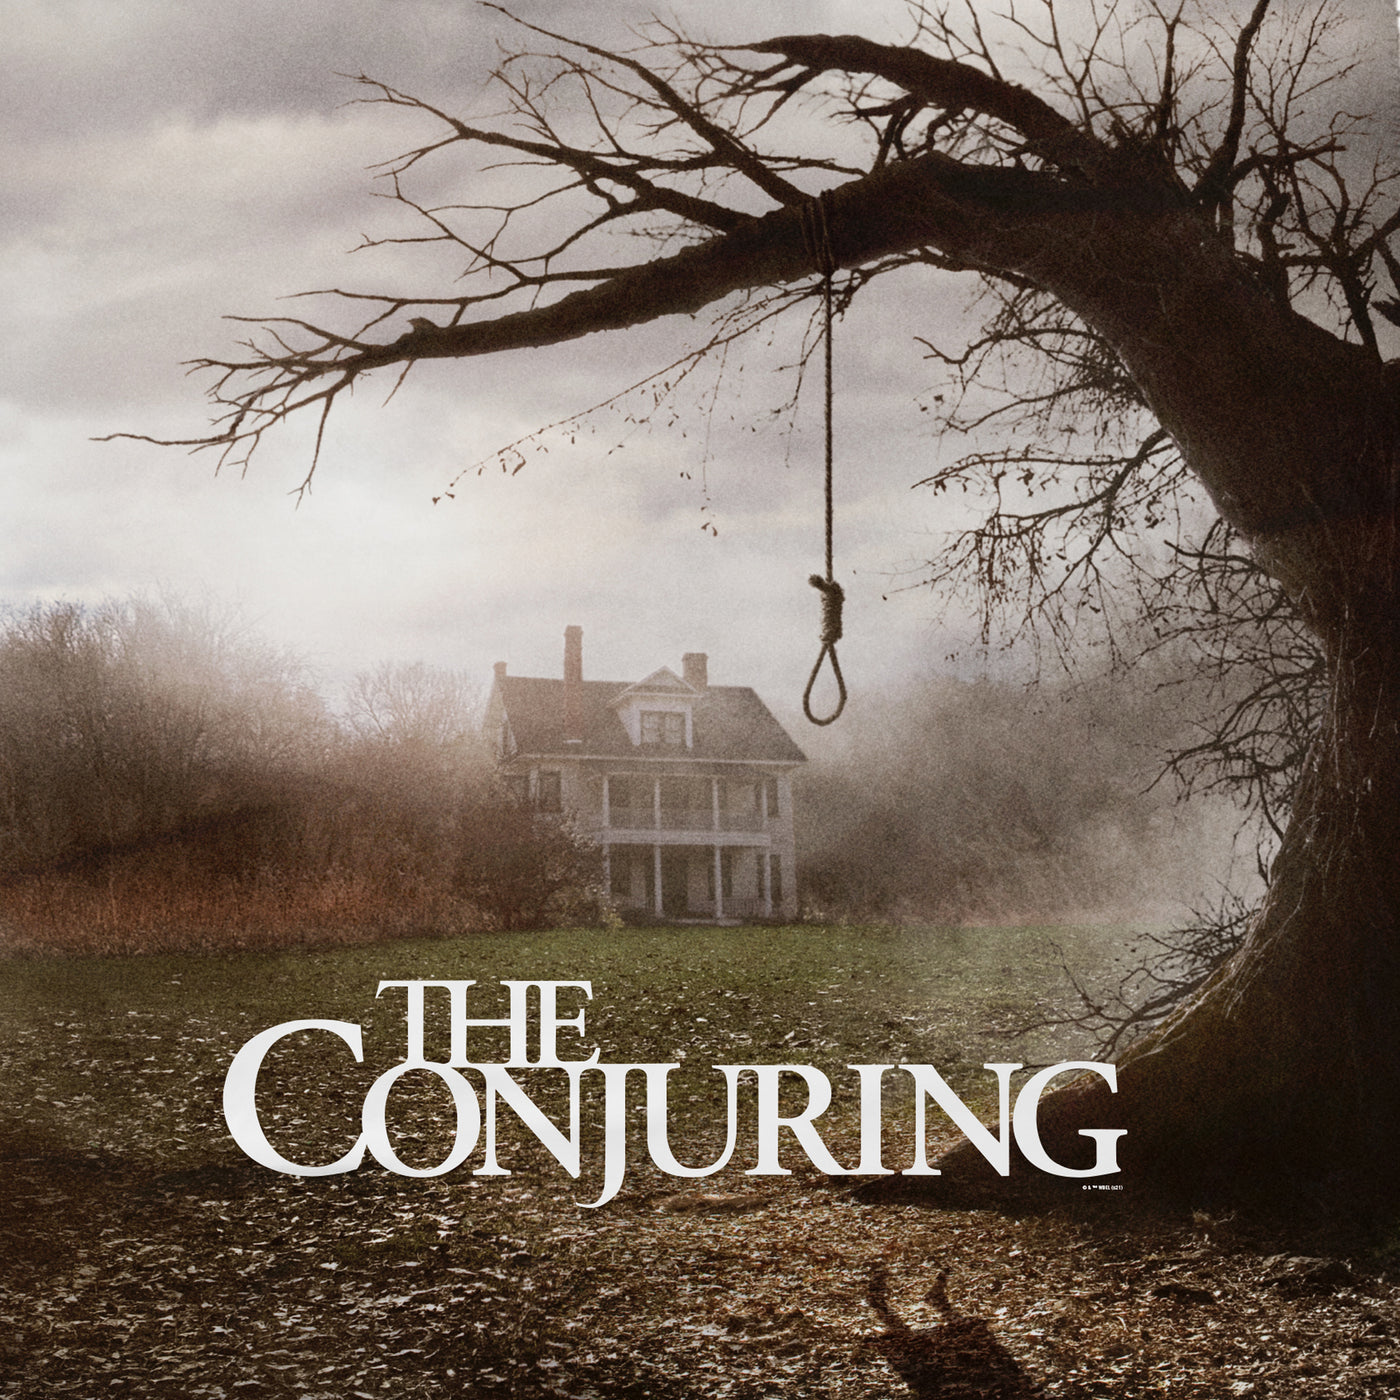 The Conjuring Poster Art Sherpa Blanket